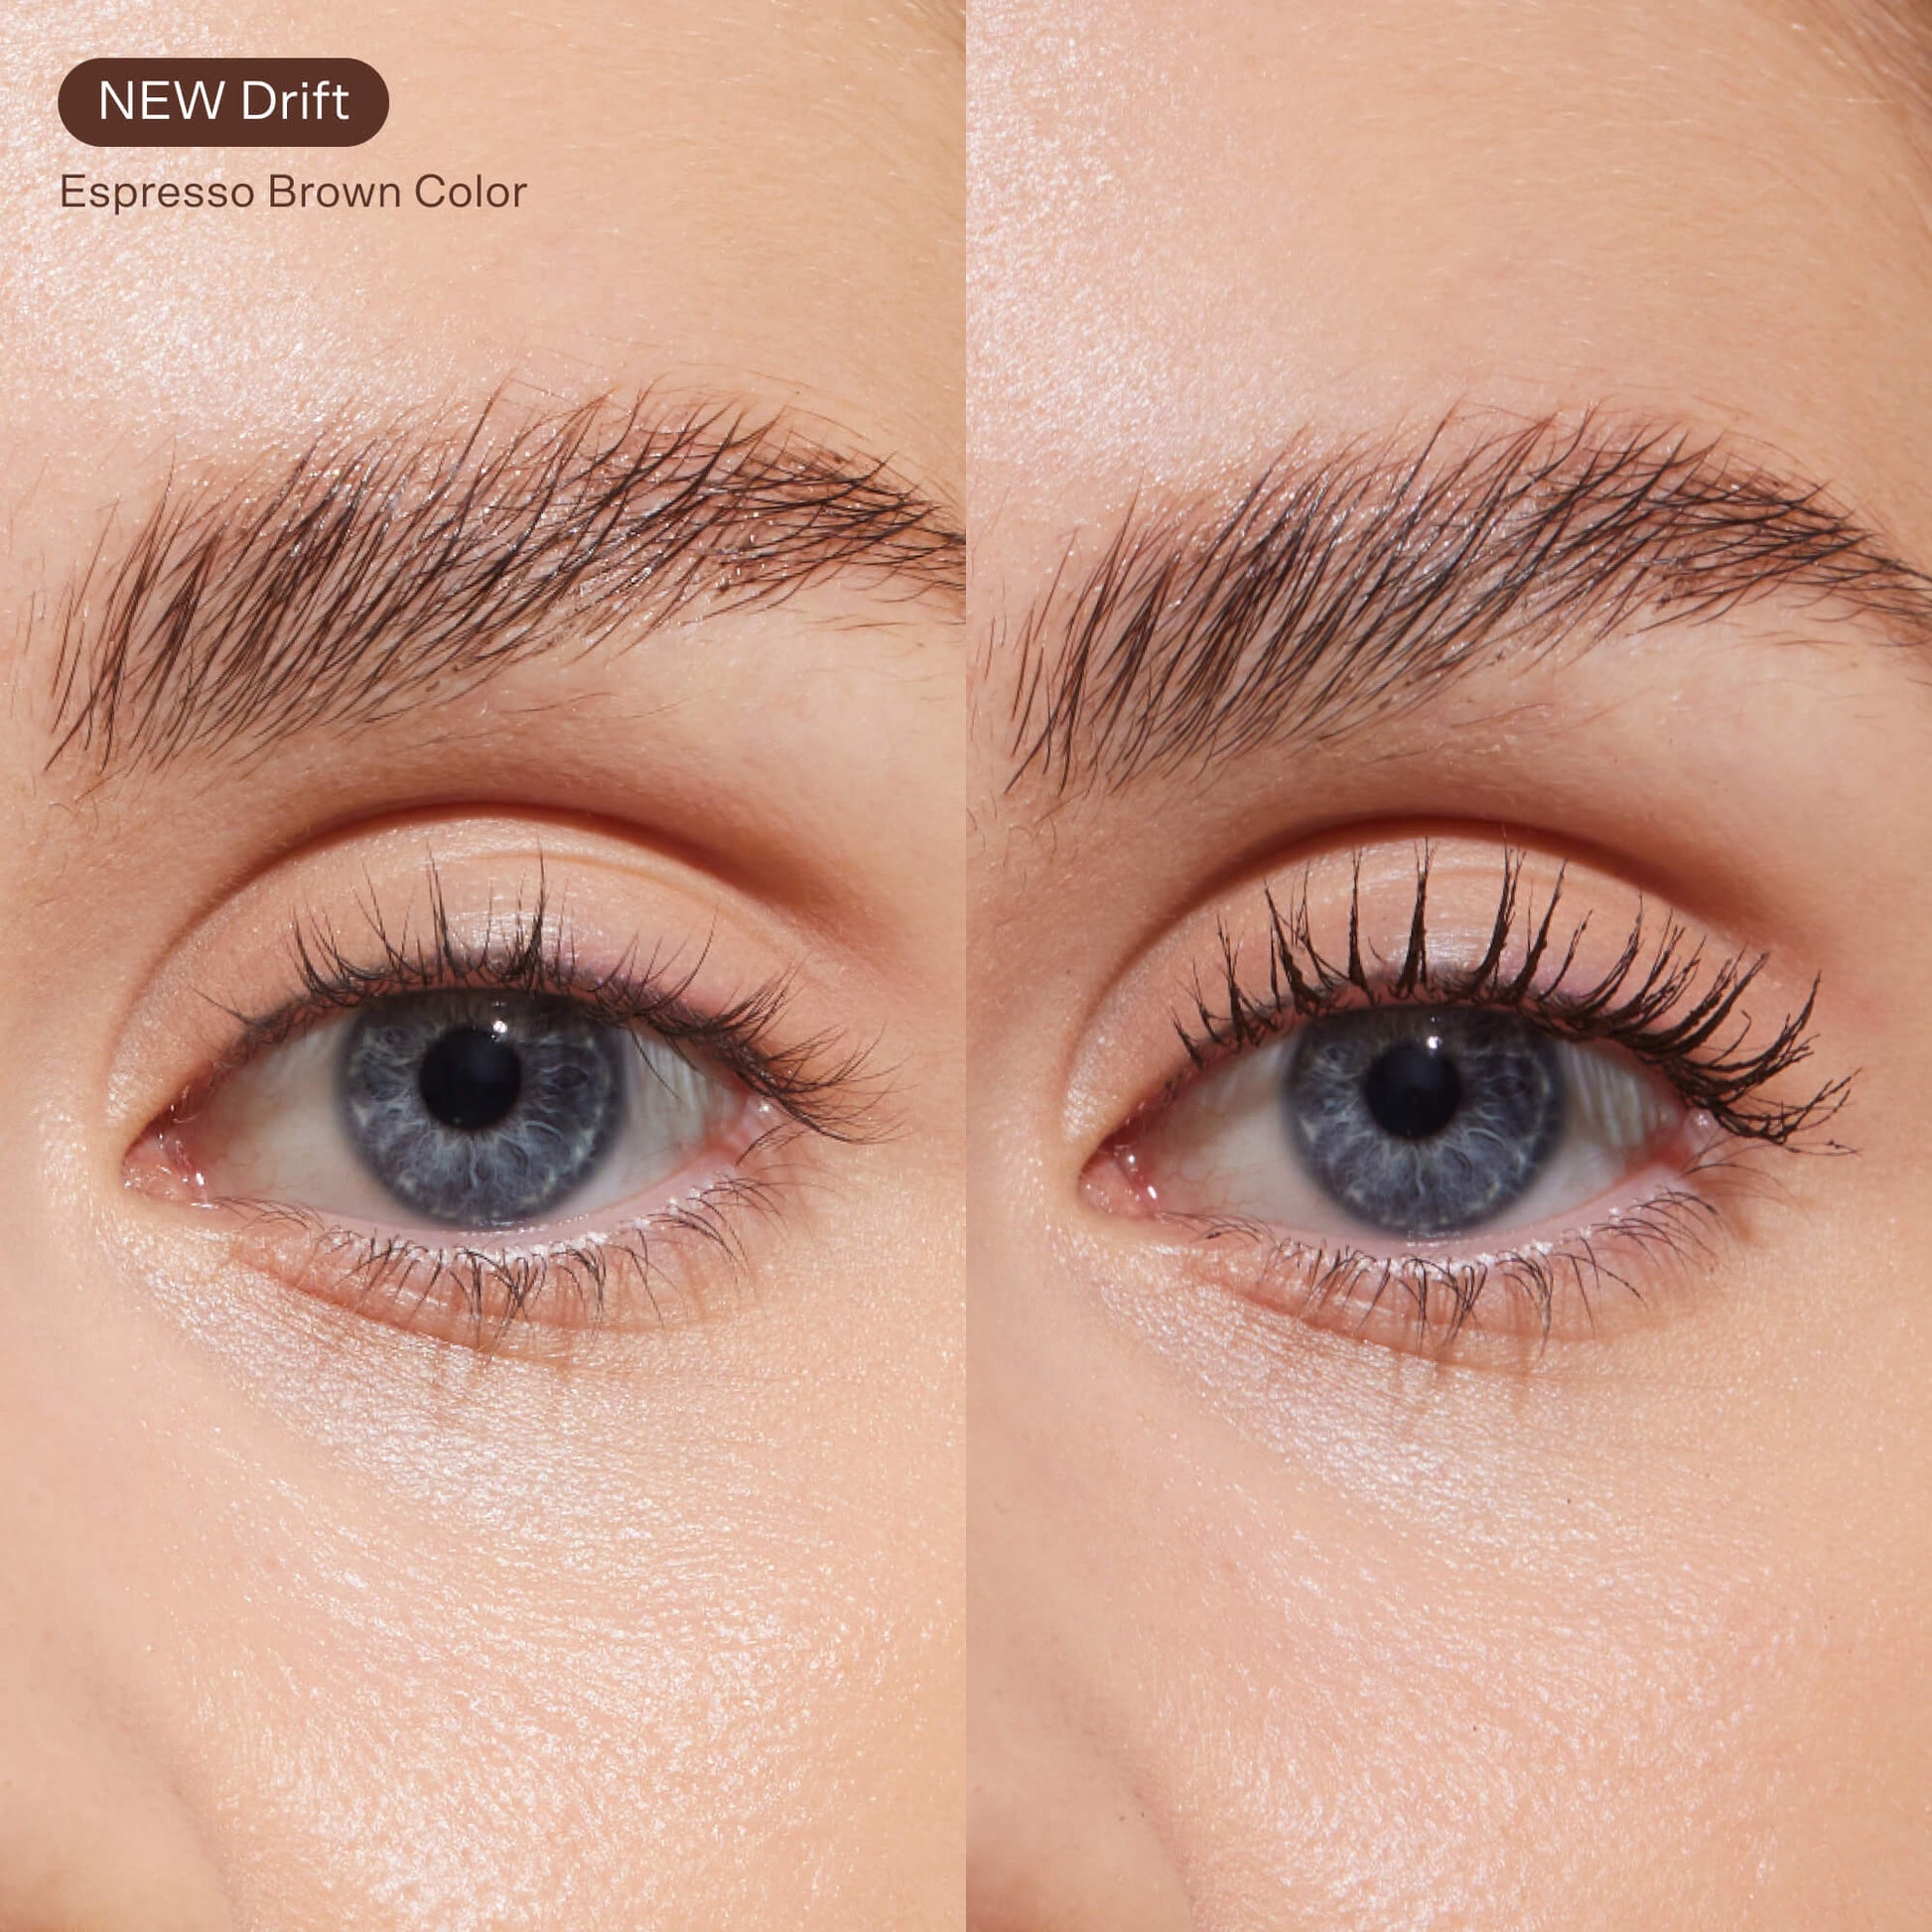 A close up of a model's eyelashes before and after applying the Tower 28 Beauty MakeWaves™ Mascara in Drift. Lashes are visibly lifted and lengthened